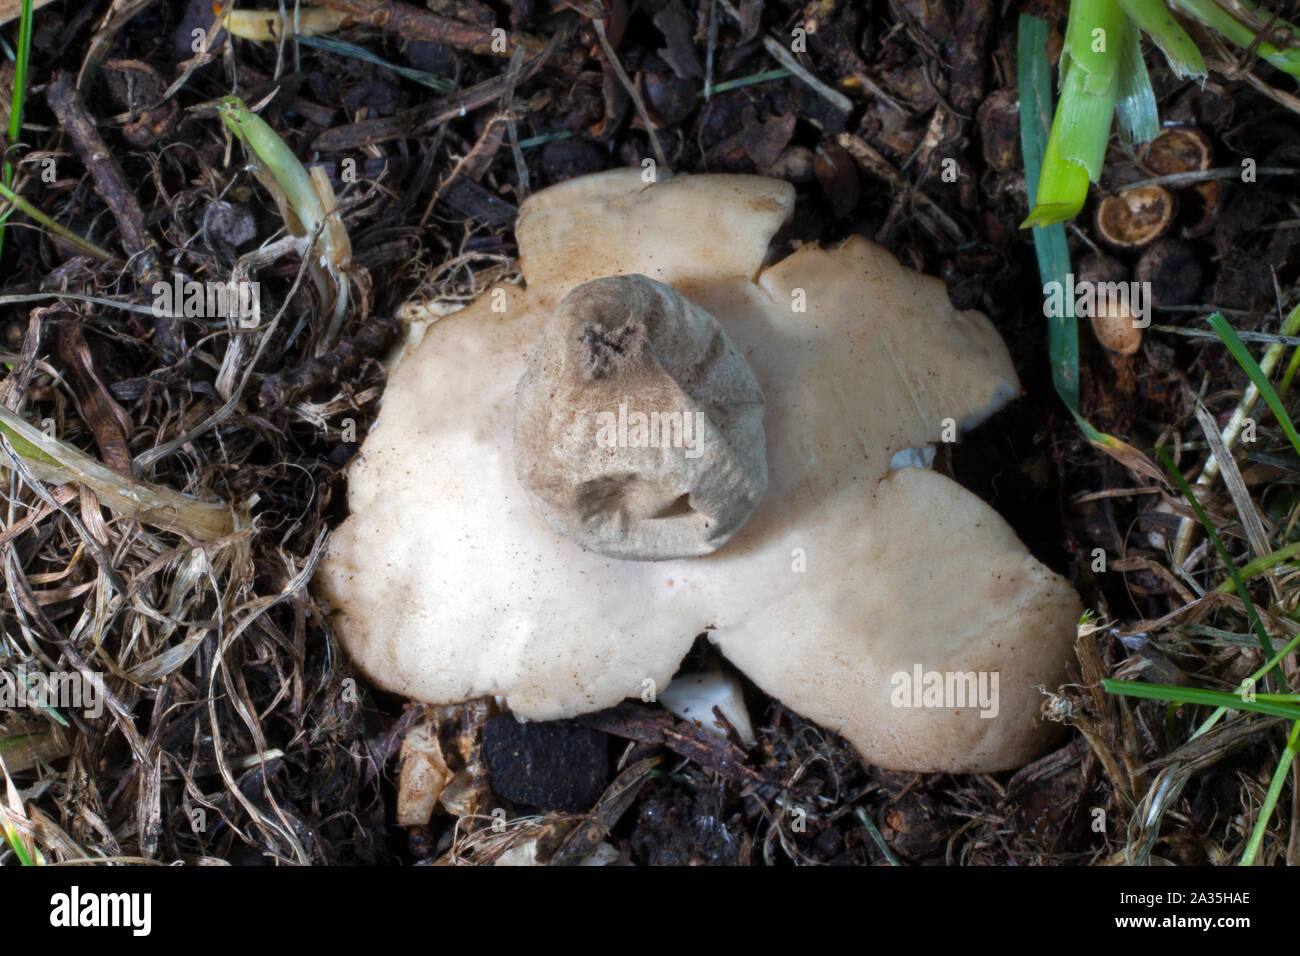 Geastrum fimbriatum (sessile earthstar) was here found at the base of a yew tree in a churchyard in North Wales. Stock Photo